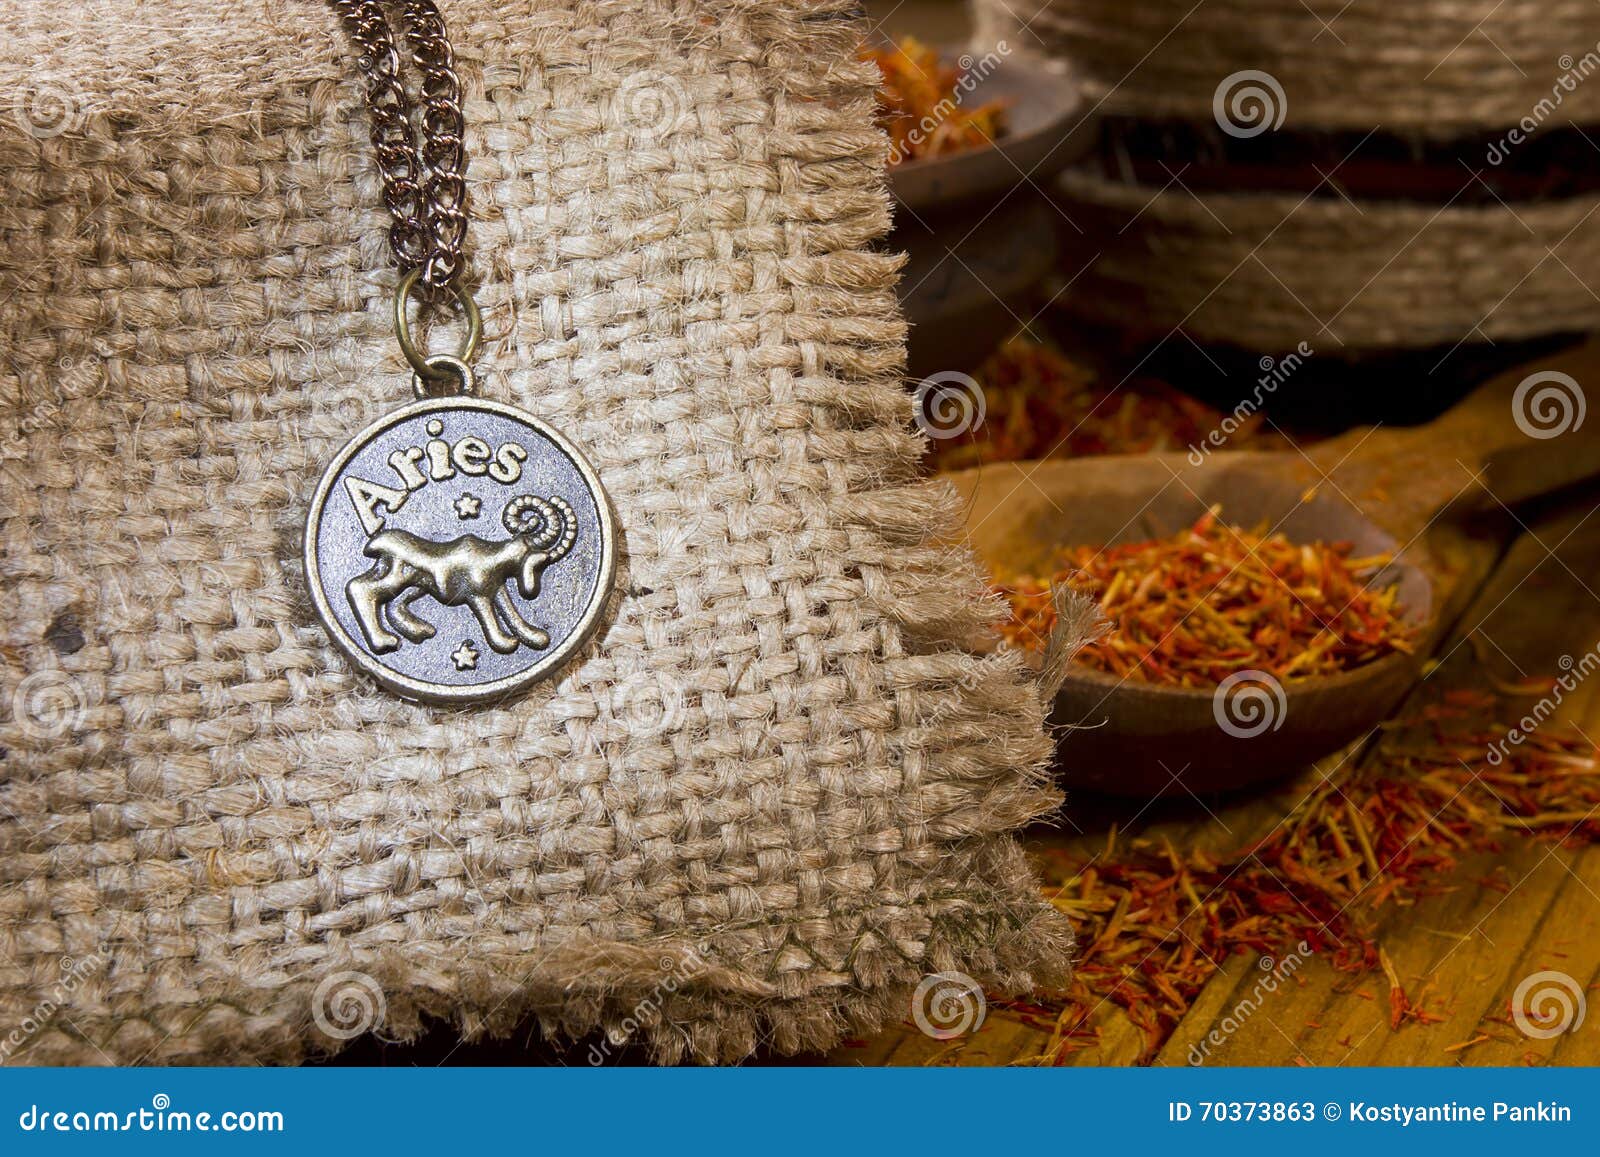 medallion with the sign of aries and saffron